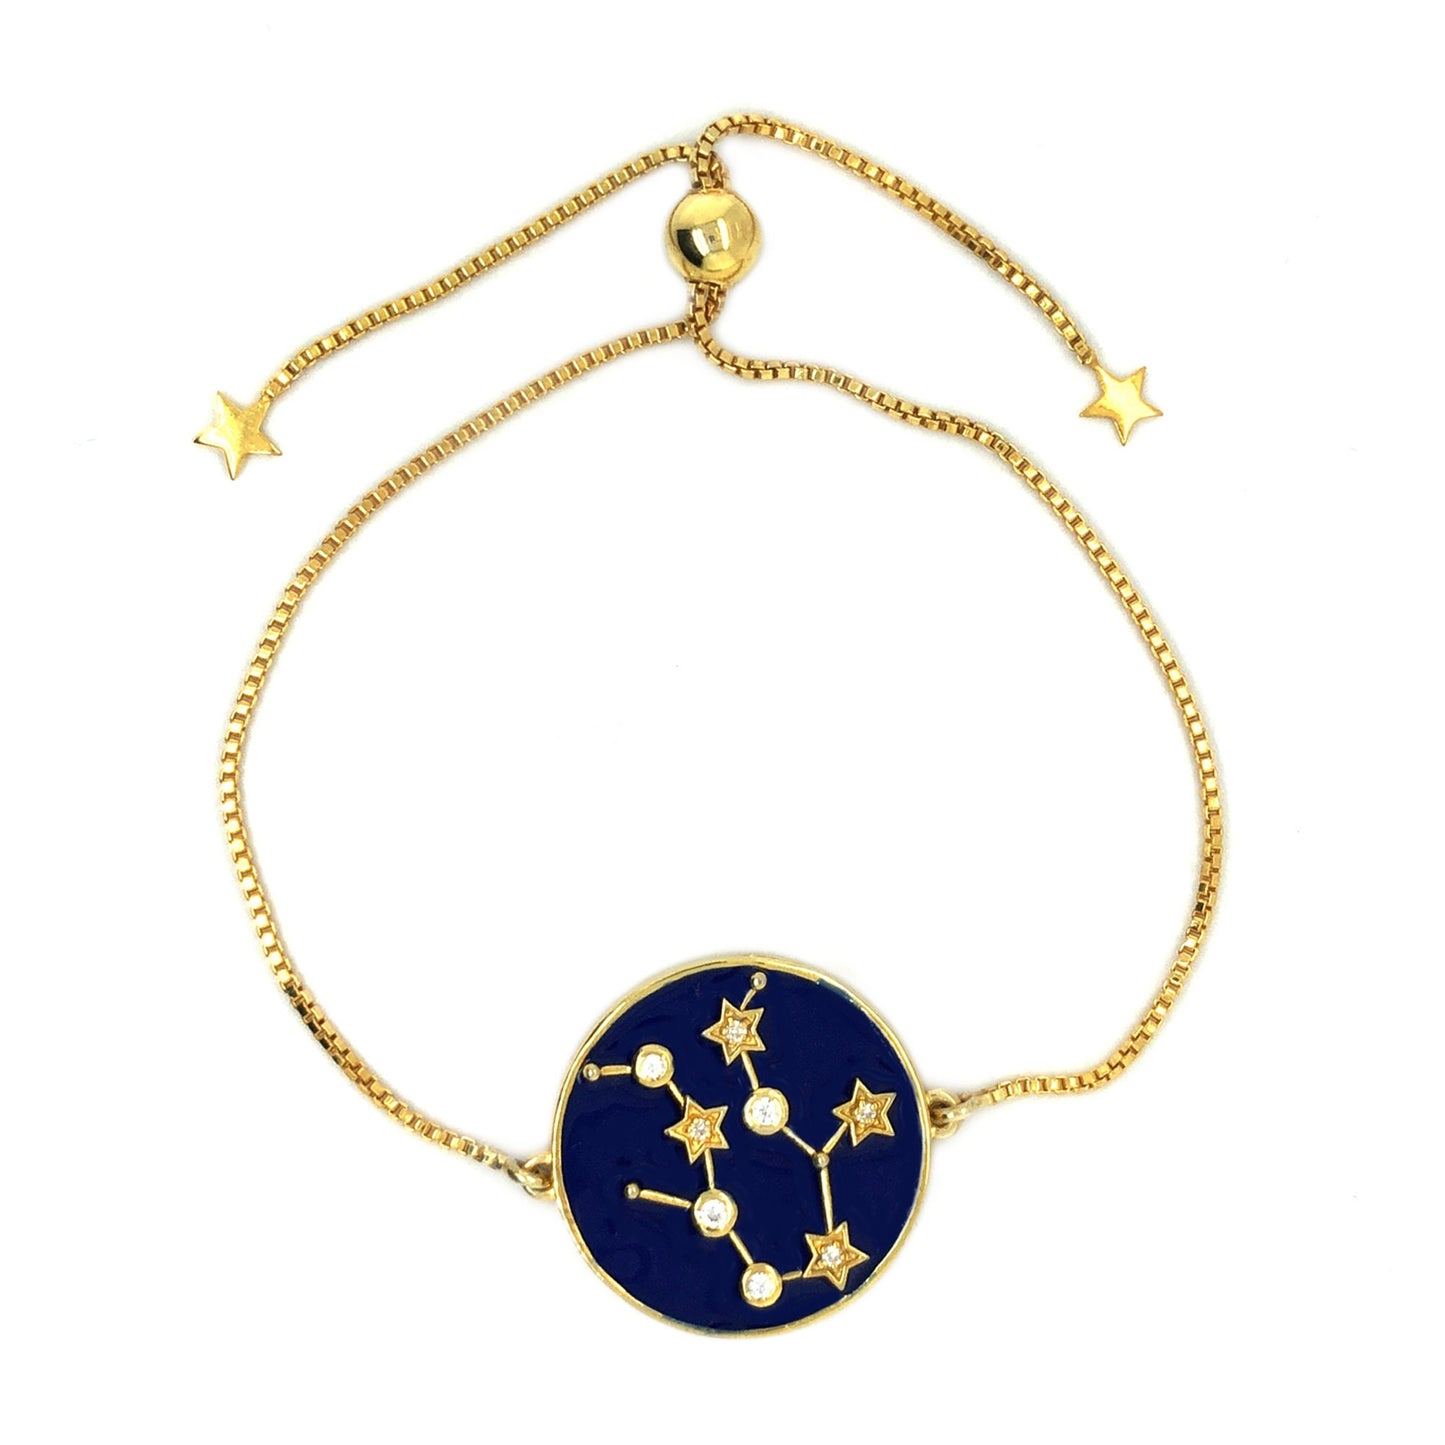 Natural White Zircon And Blue Enamel Zodiac Constellation, 925 Sterling Silver Over Gold Plated Circle Bolo Bracelet, Gift For Her